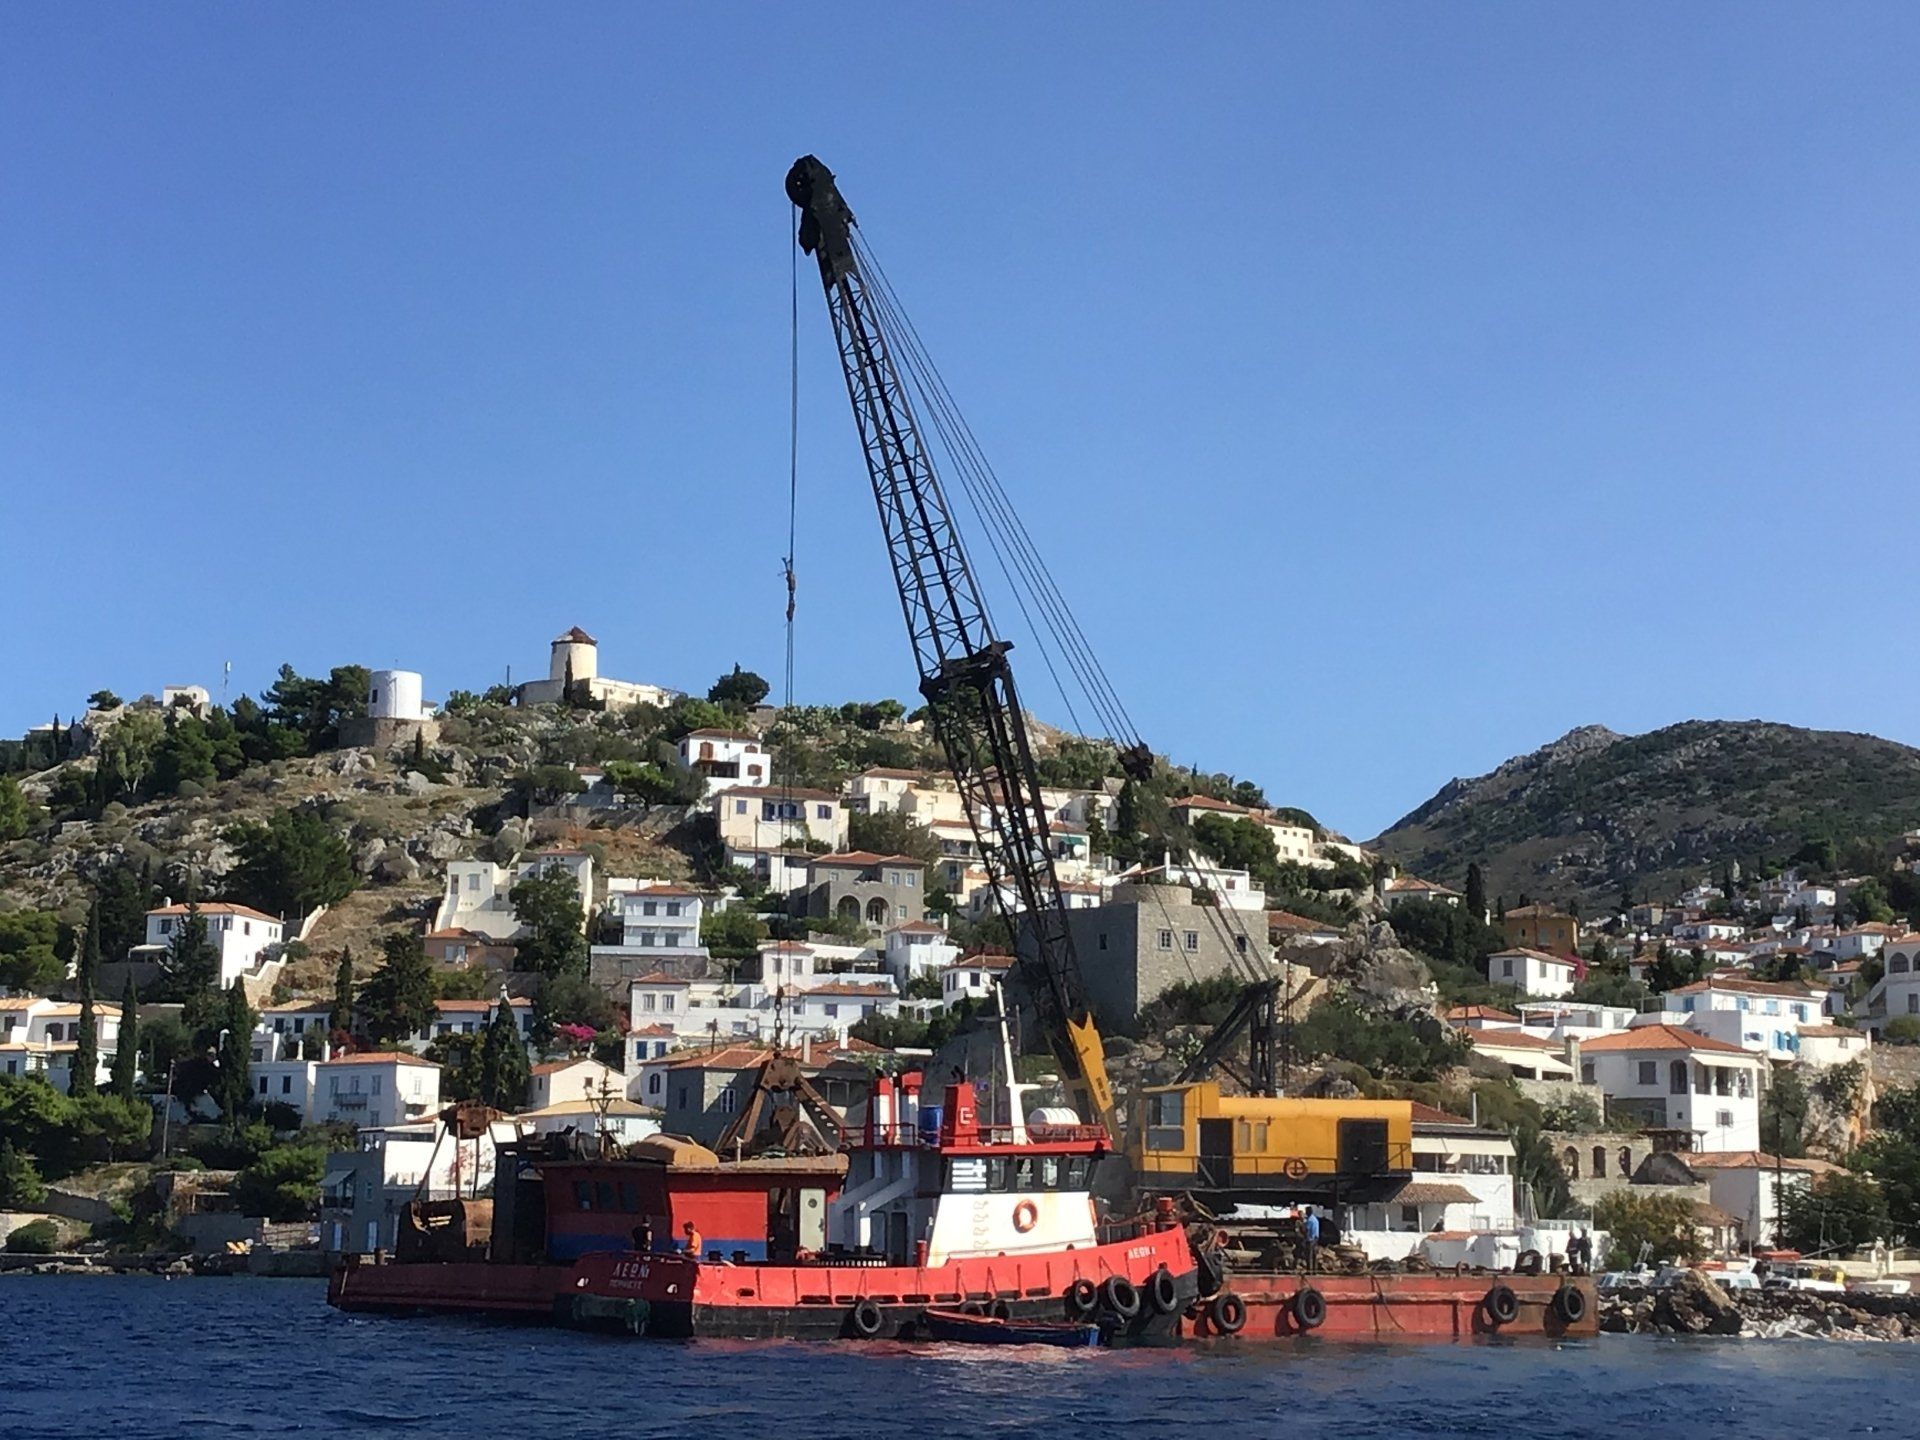 Crane barge bringing stone by sea to repair the erosion of the jetty at Kamini Harbour, Hydra.